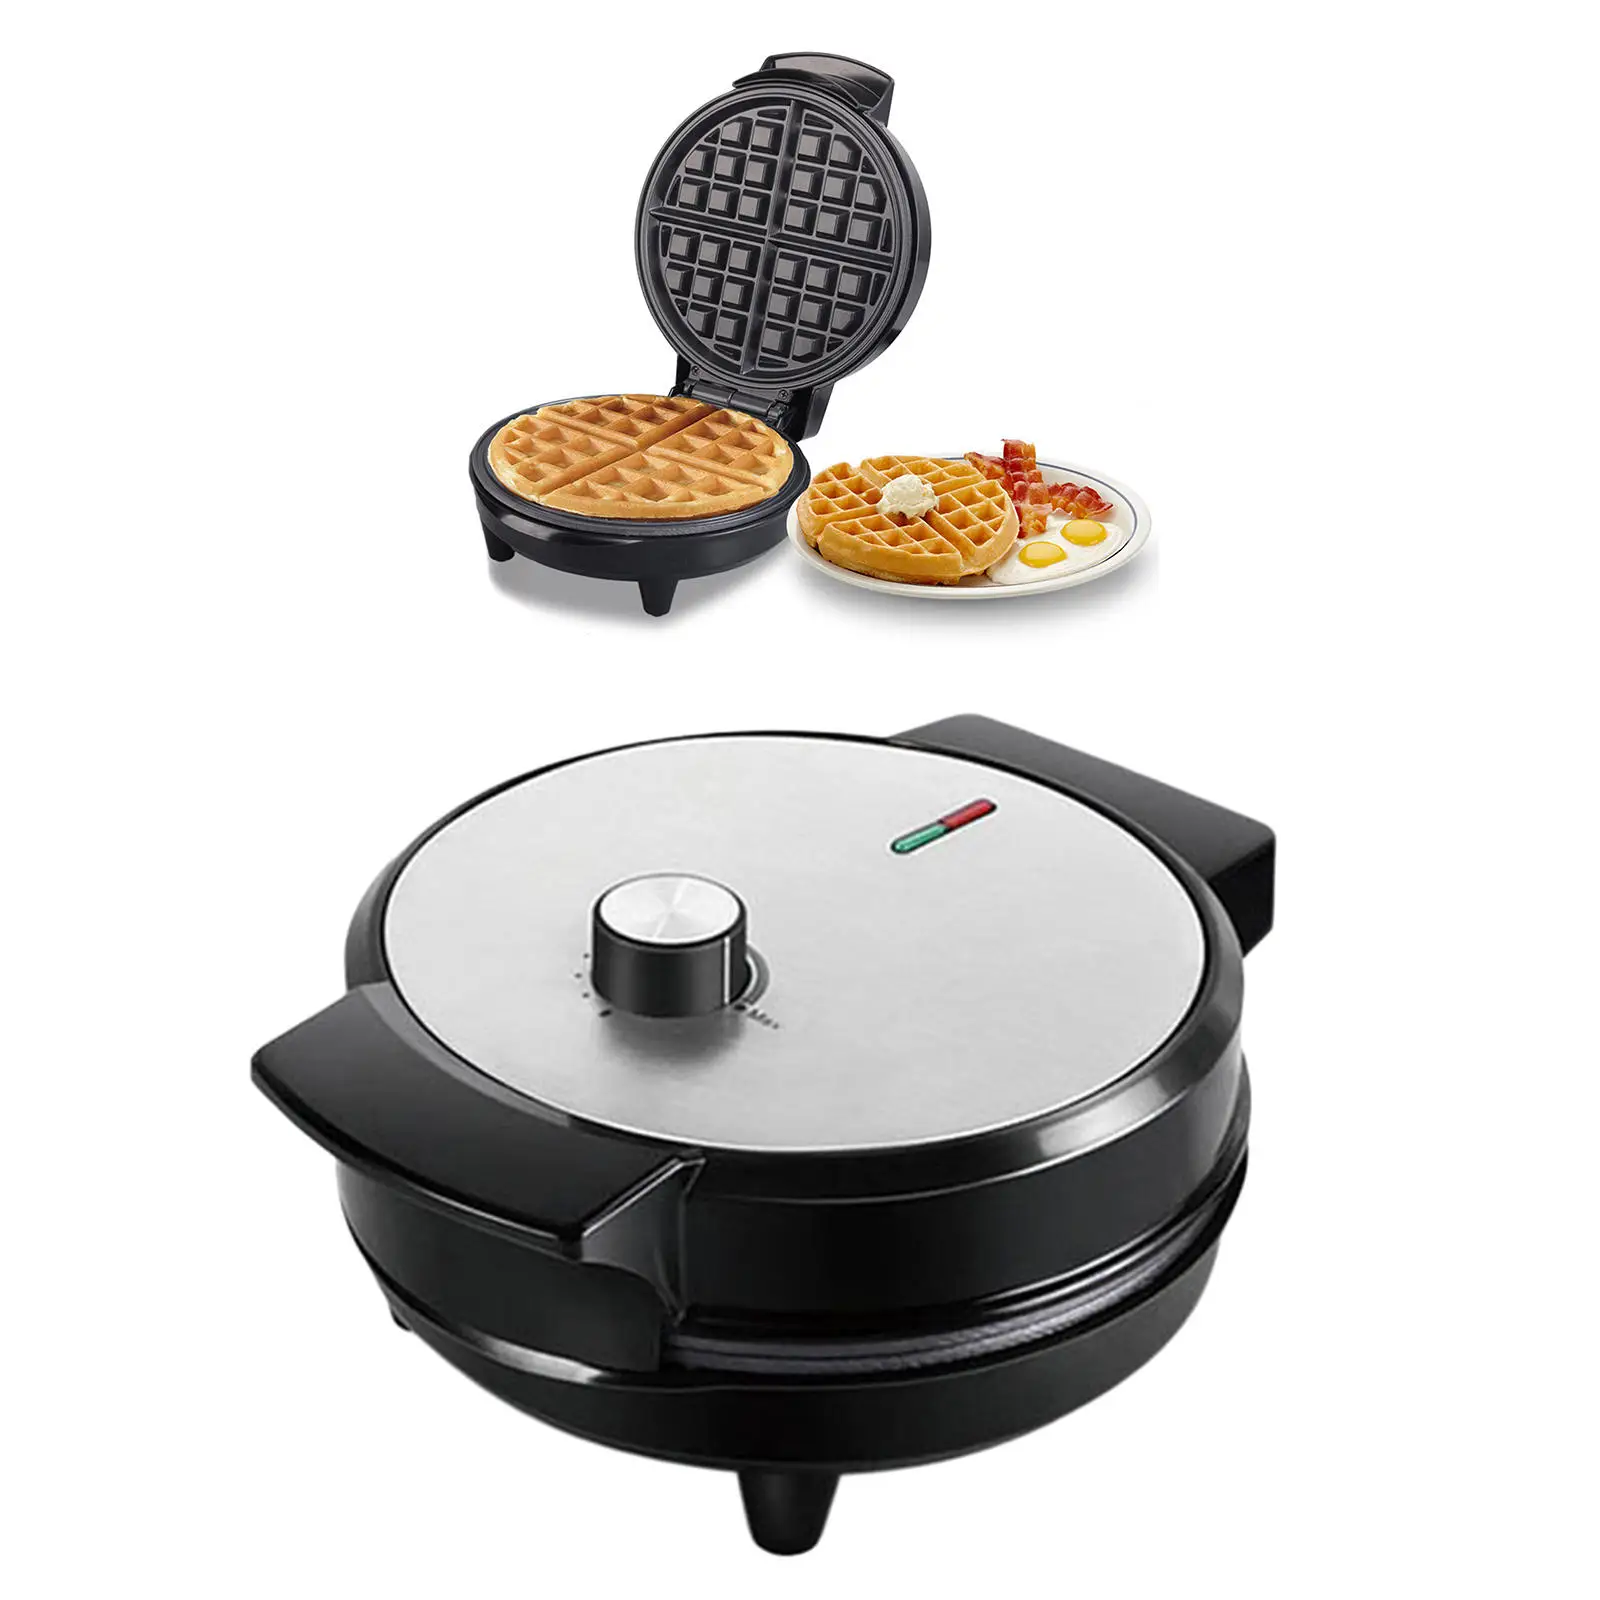 Stainless Steel Waffle Maker Adjustable Cooking Tools Waffles Iron Baking Toaster 220V Waffle Making Machine for Home Kitchen